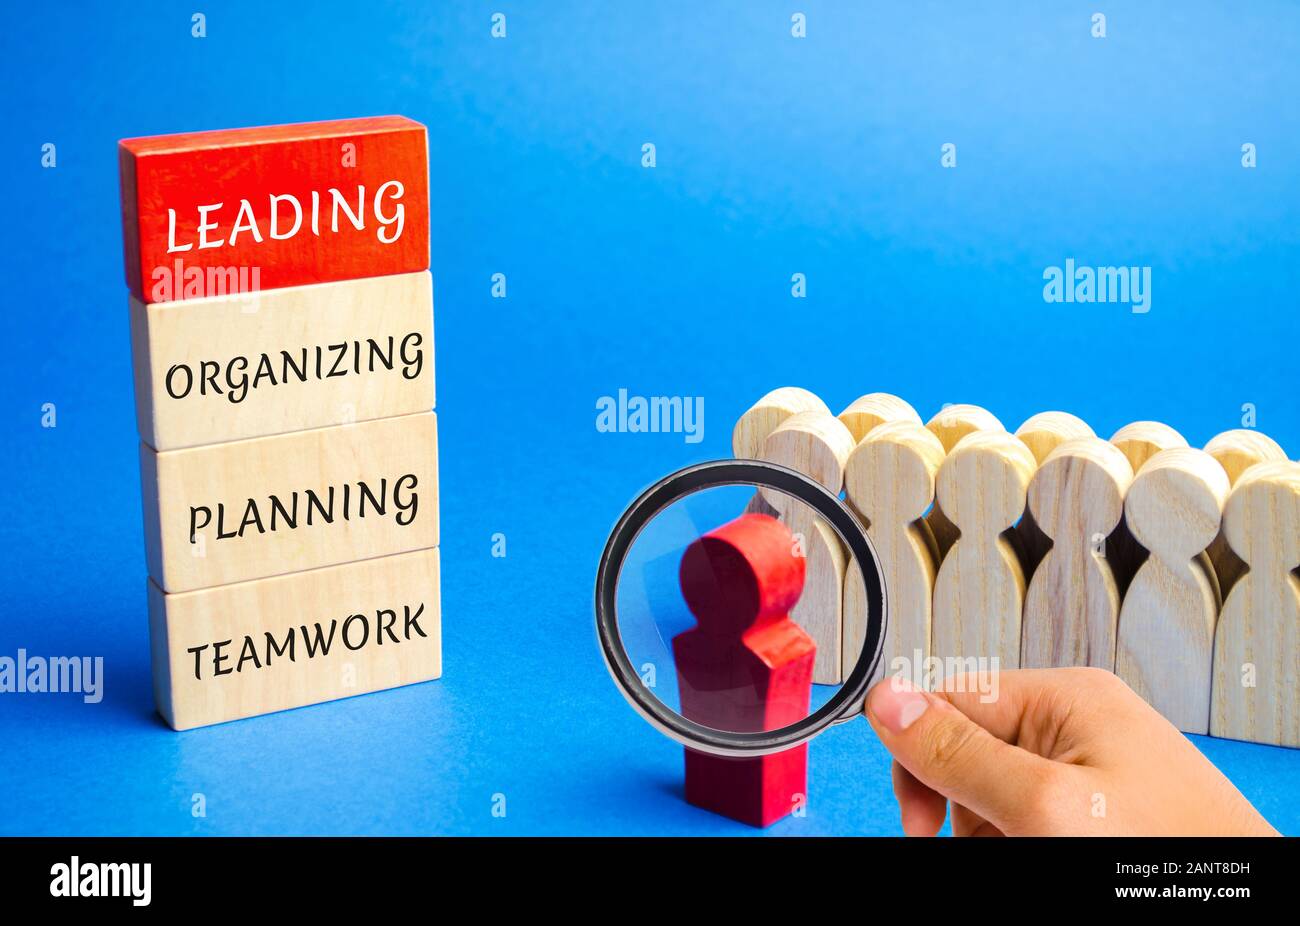 Wooden blocks with the word leading, organizing, planning, teamwork. Concept of business plan and strategy. Management, controlling and organization. Stock Photo